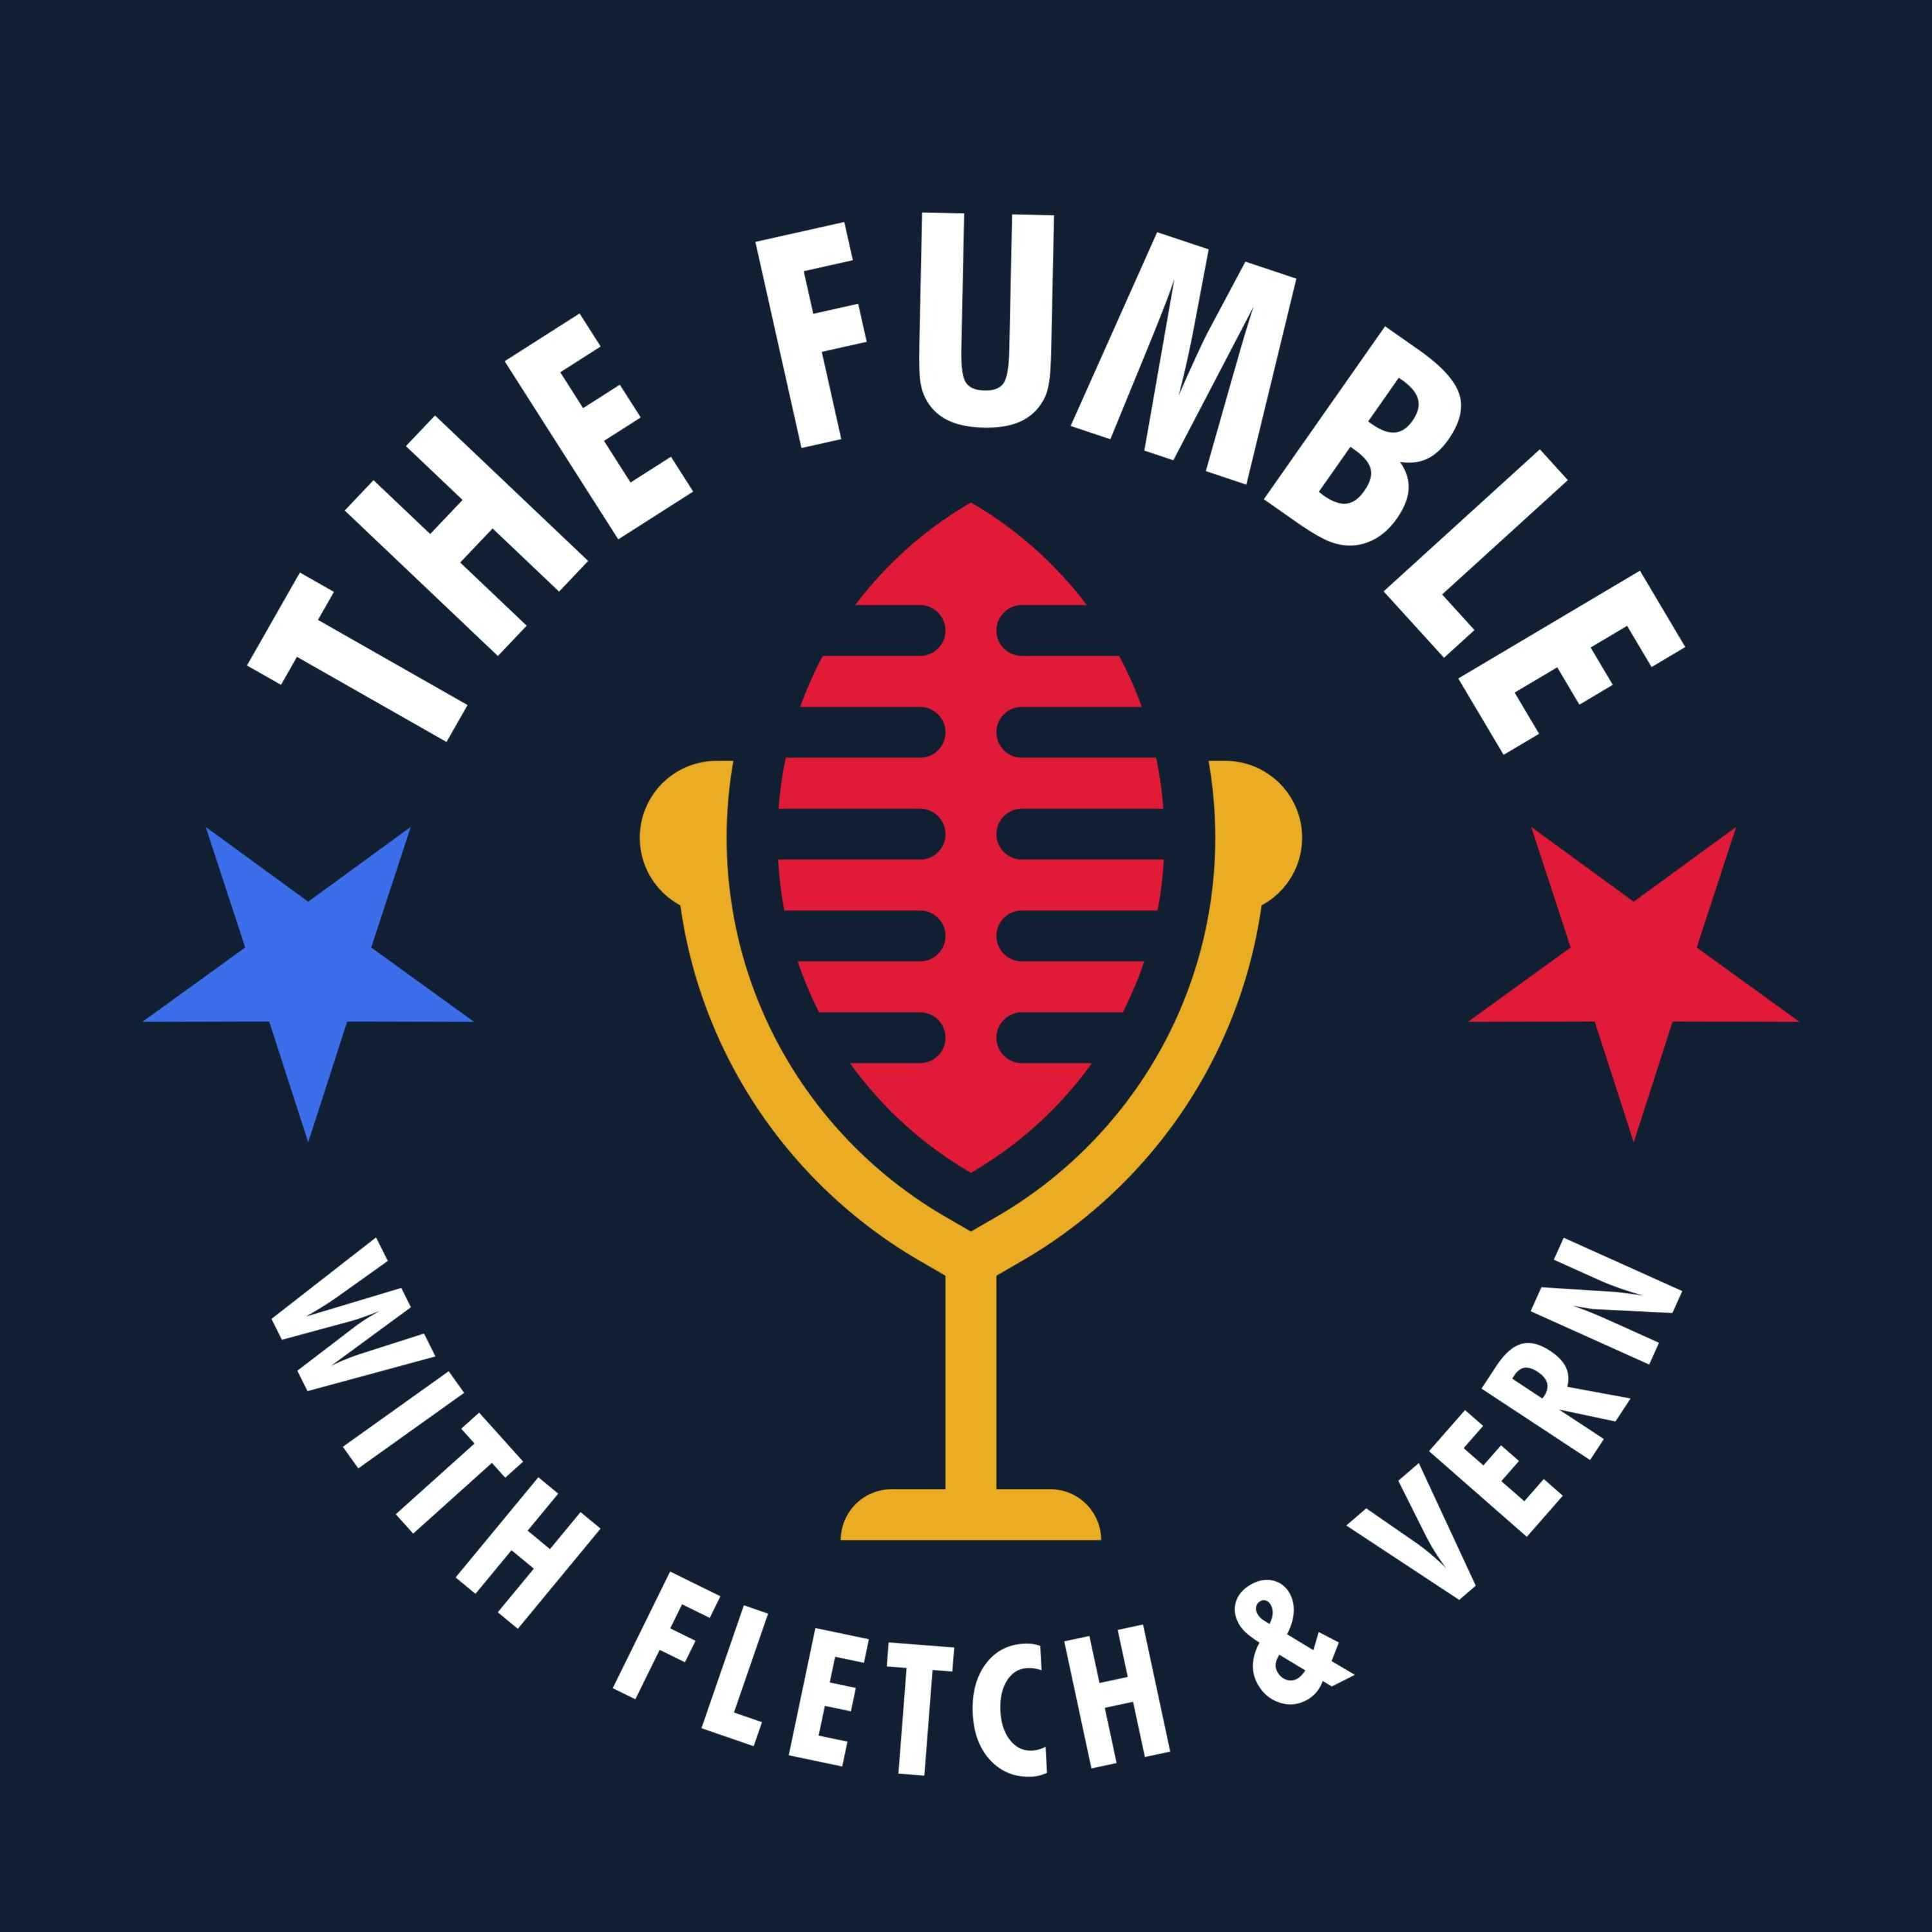 THE FUMBLE with FLETCH & VERN - NFL 2021 SEASON PREVIEW